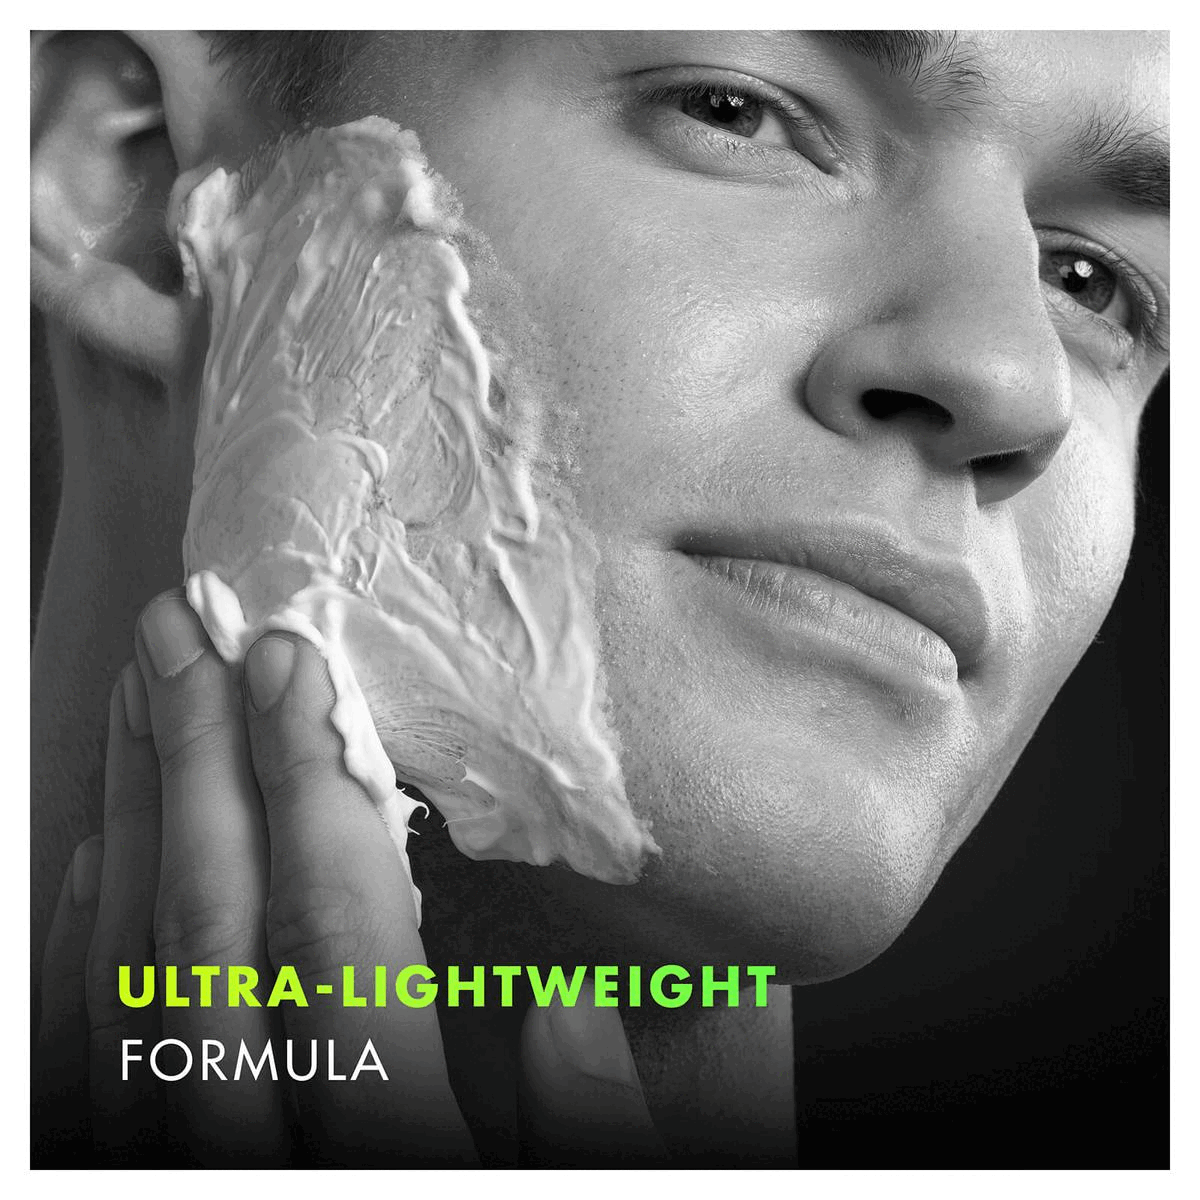 ultra-lightweight formula. Helps protect your skin from shaving irritation. Quickly rinses clean. features a light and refreshing fragrance. elevate your routine. Recyclable metal packaging.